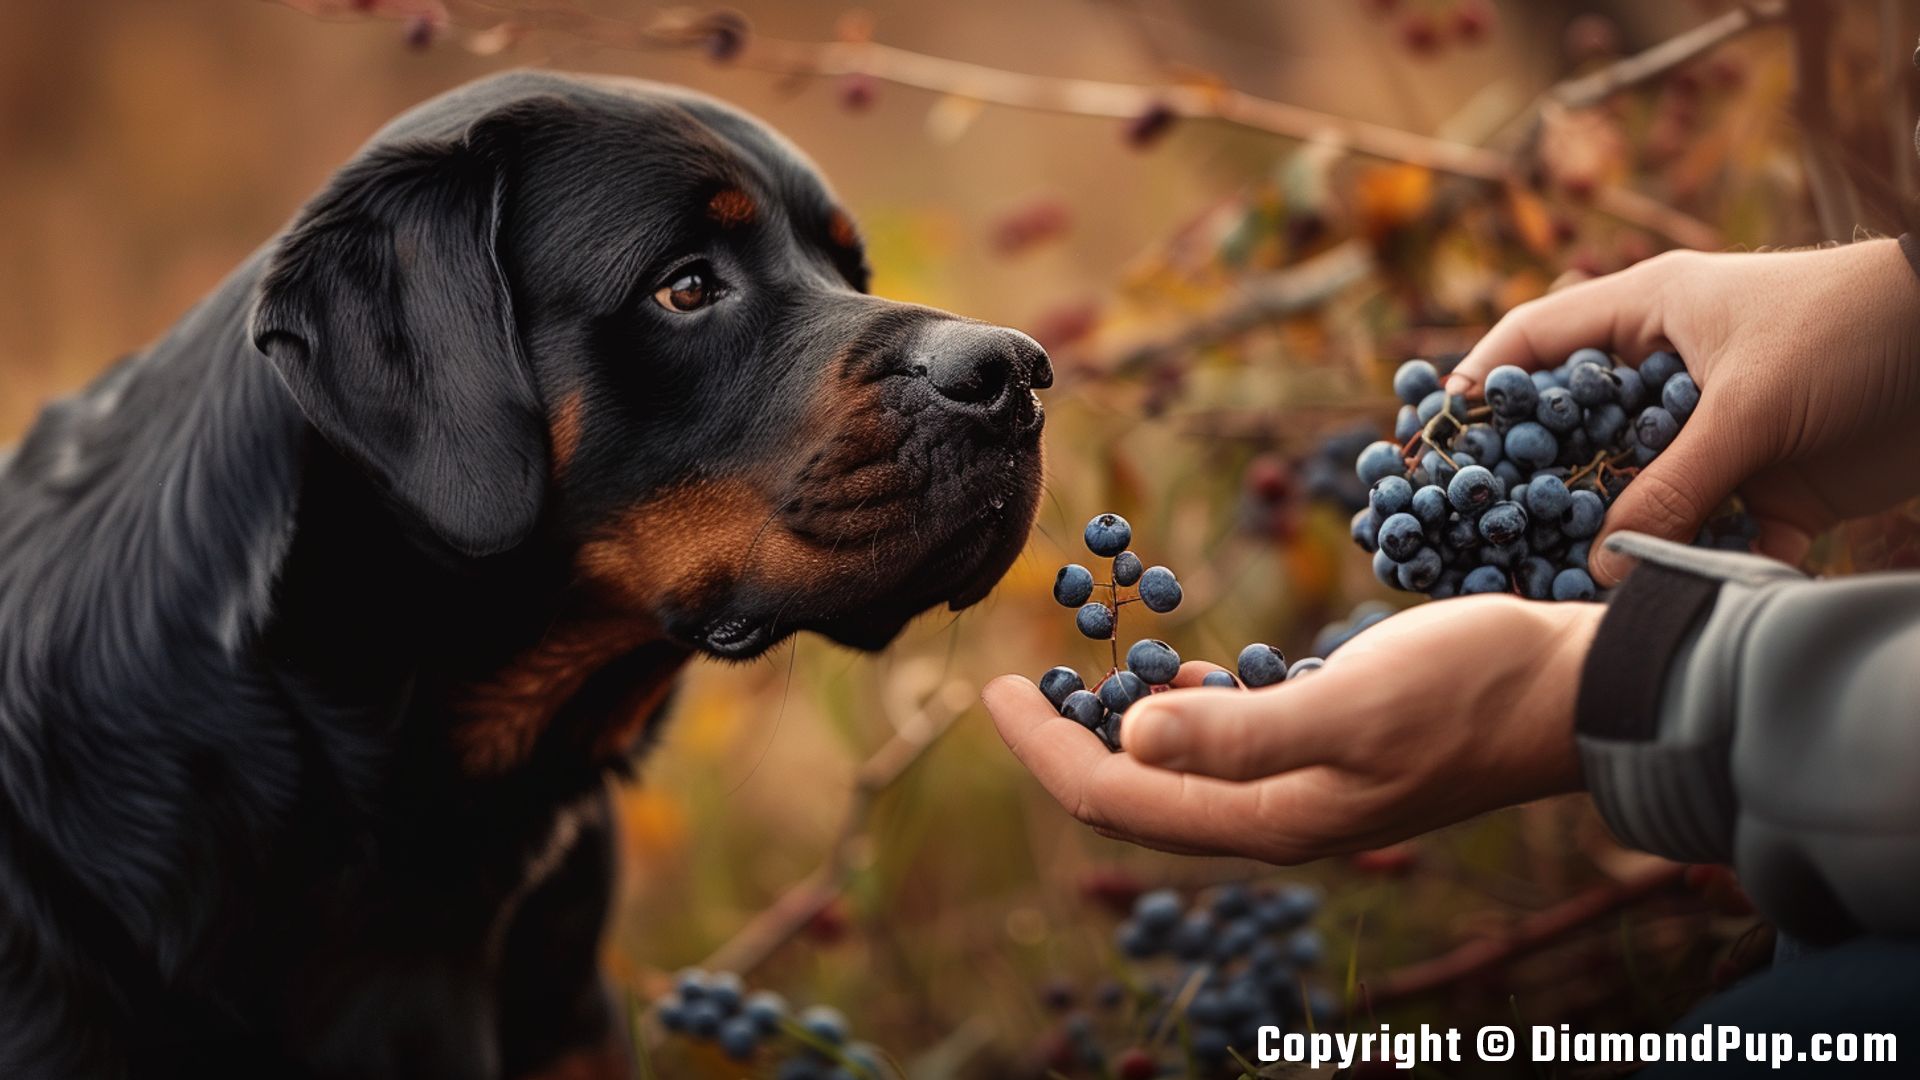 Photograph of Rottweiler Eating Blueberries